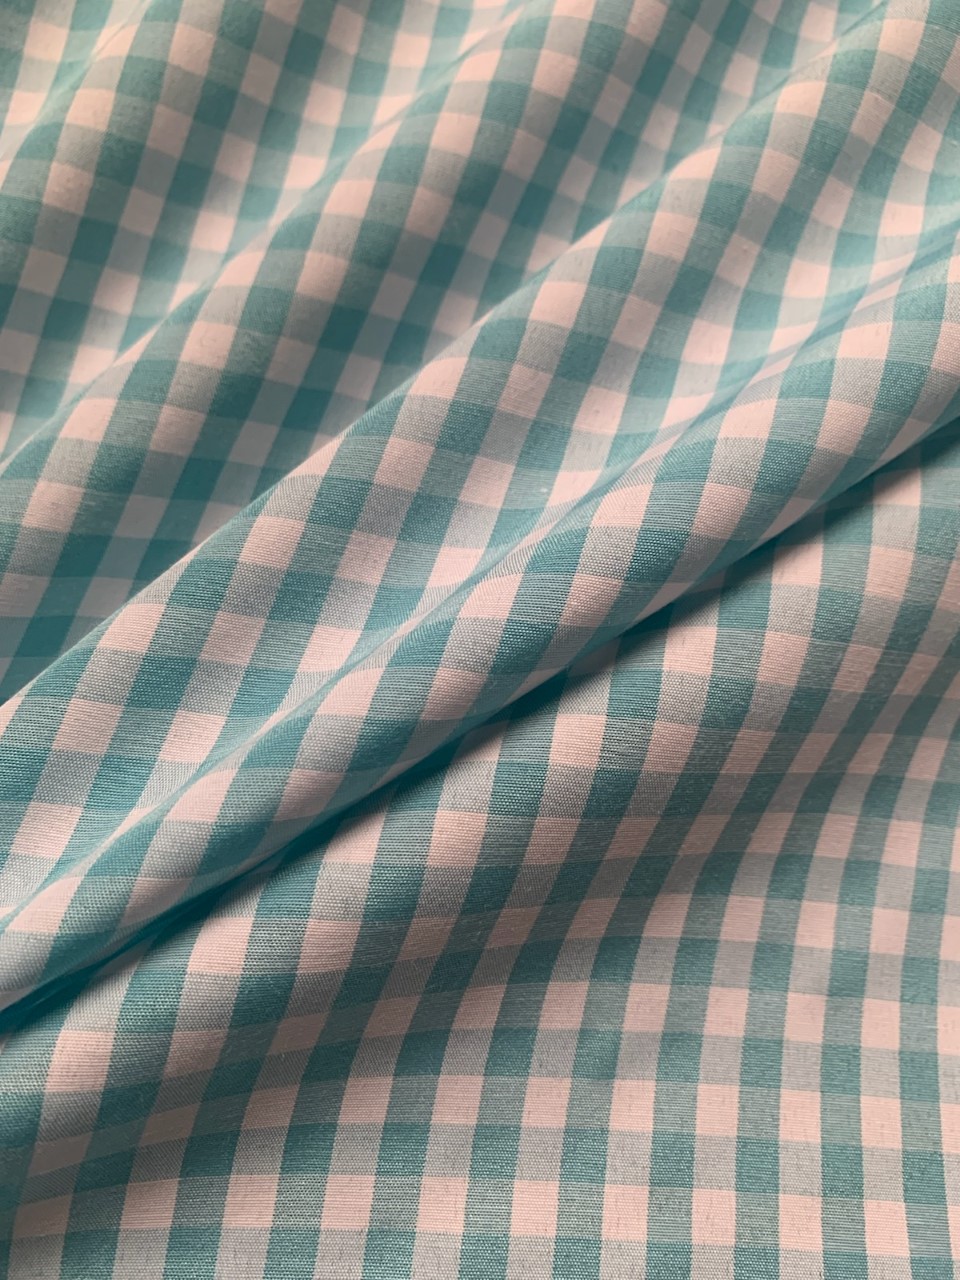 1/4" Aqua Gingham Fabric 60" Wide By The Yard Poly Cotton Blend